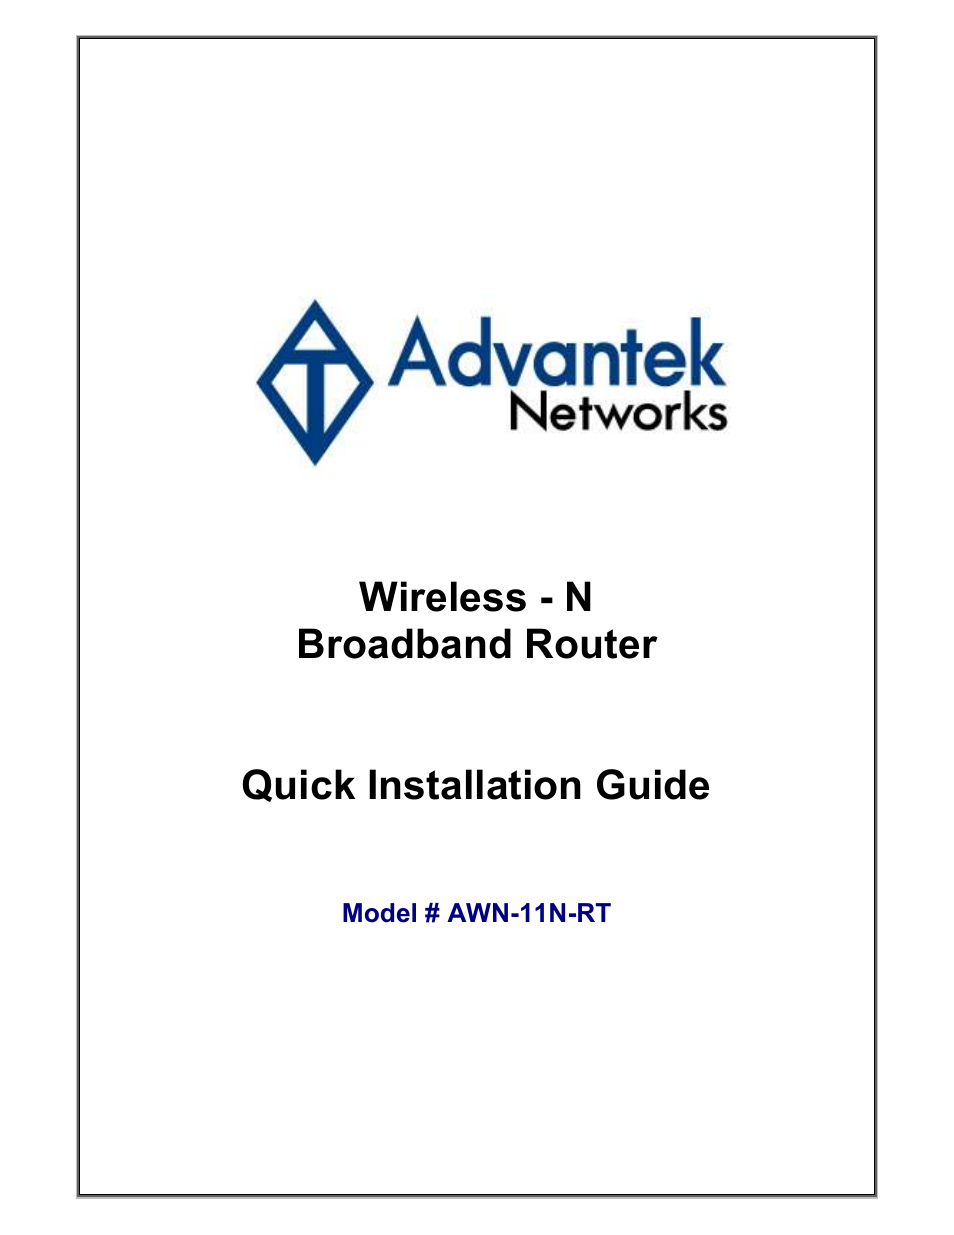 WIRELESS - N AWN-11N-RT (Page 1)